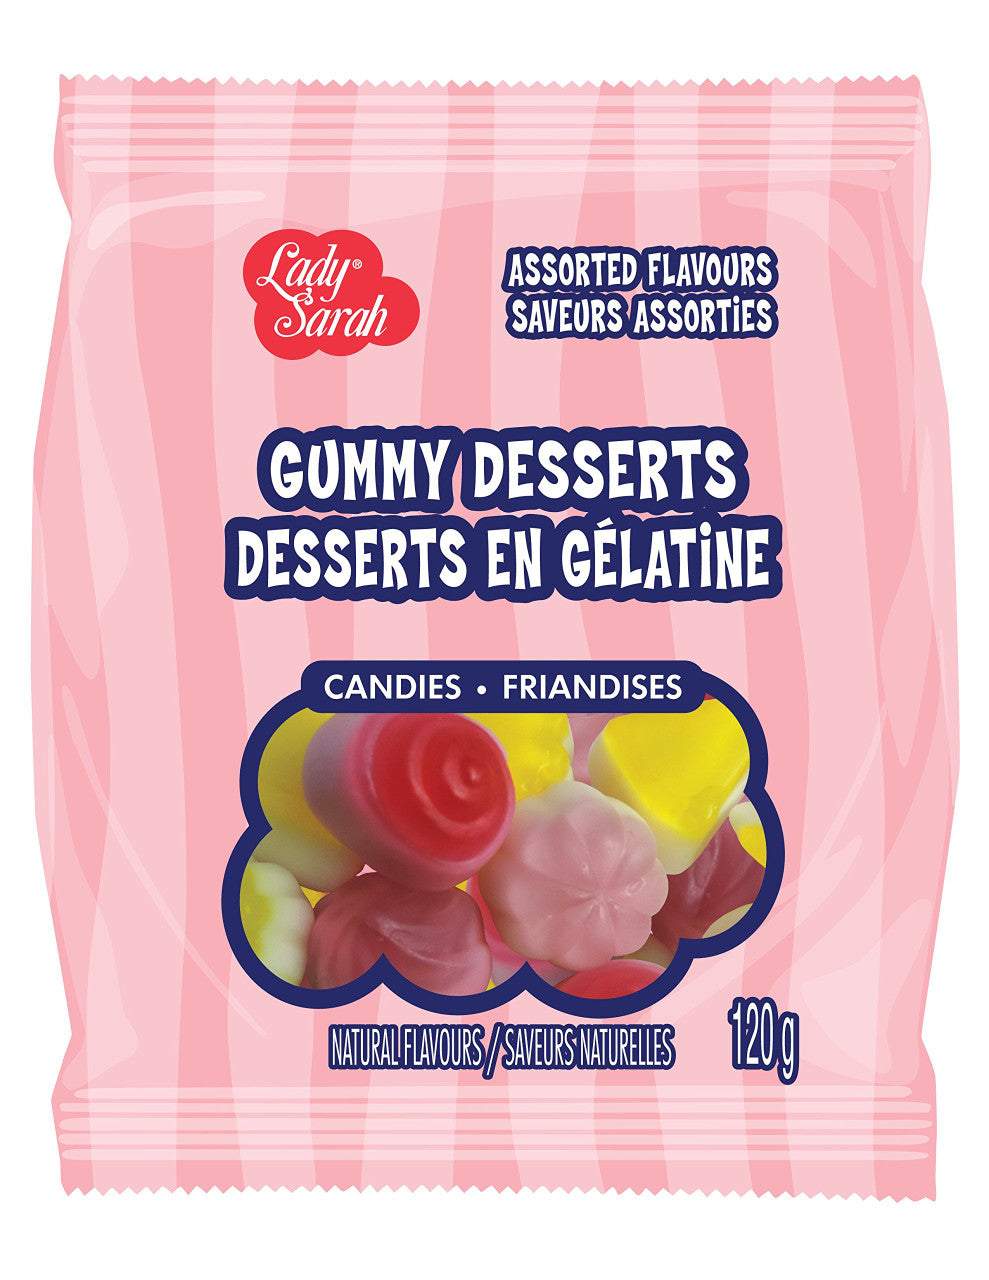 Lady Sarah Gummy Dessert,Assorted Flavours, 120g/4.2oz., Per Bag, {Imported from Canada}